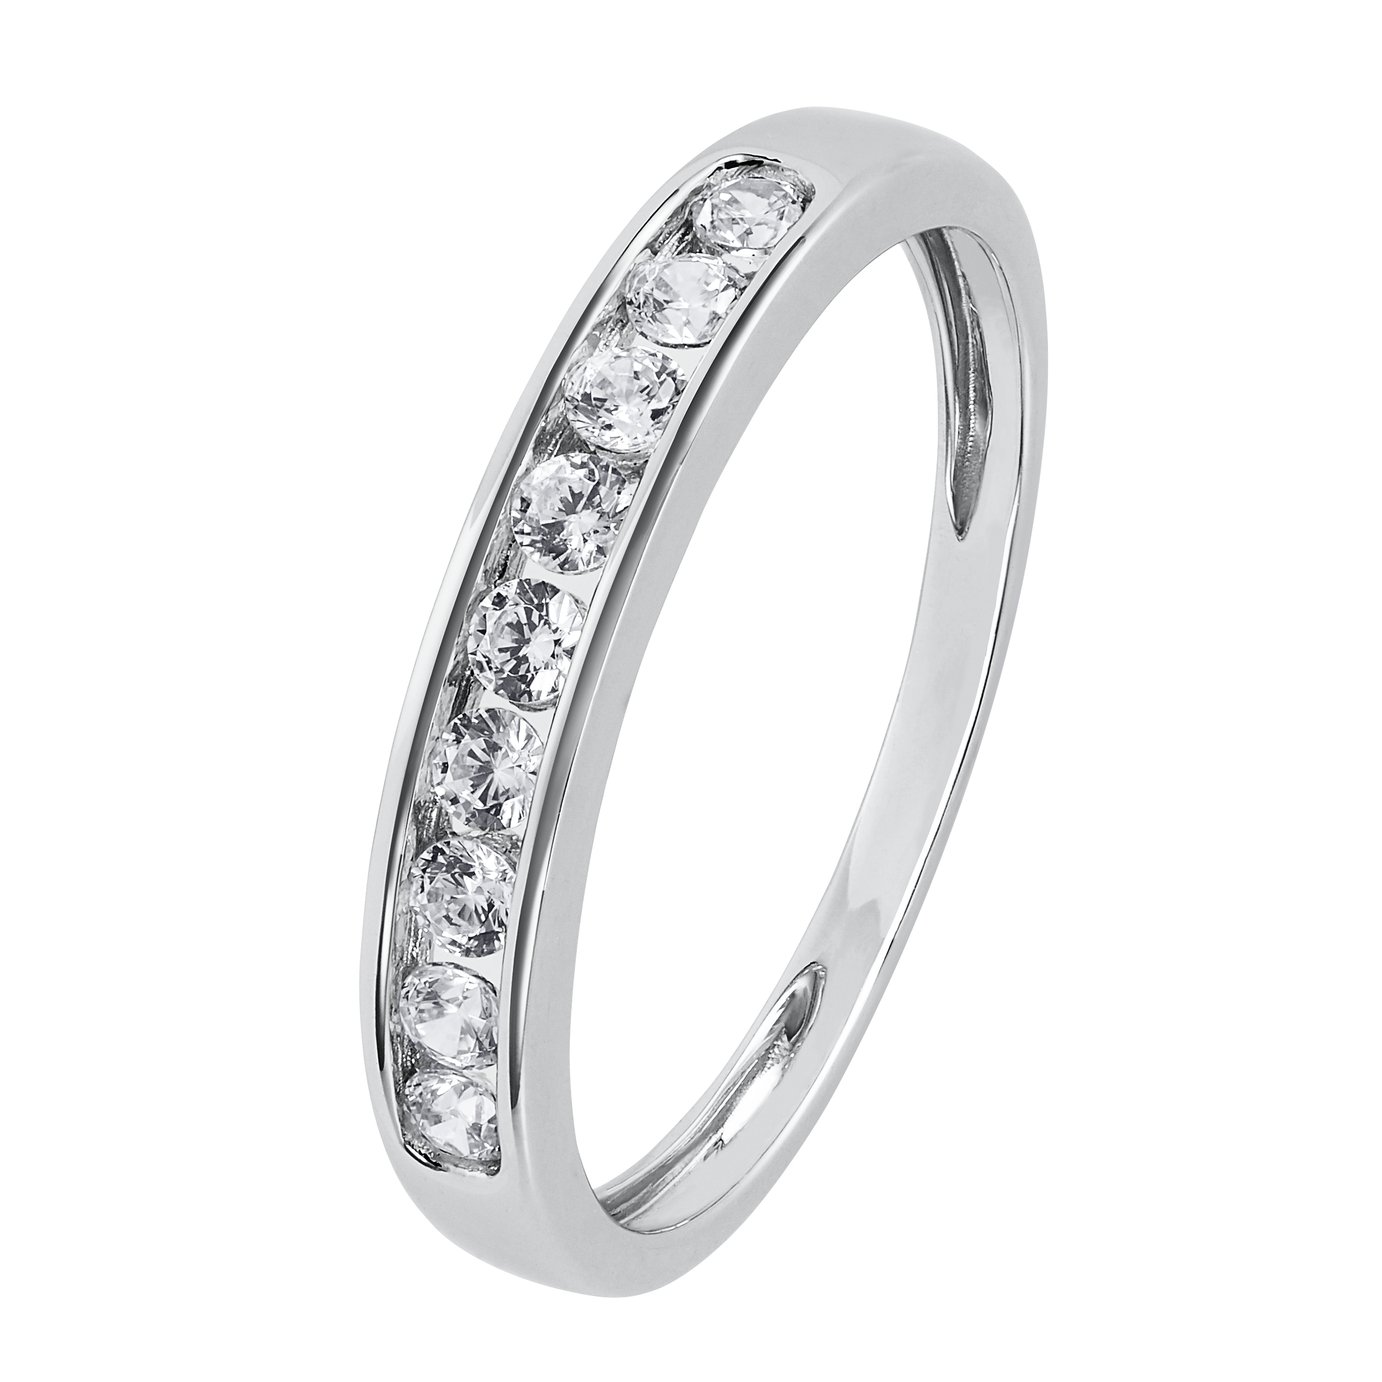 Revere 9ct White Gold Cubic Zirconia Eternity Ring - H